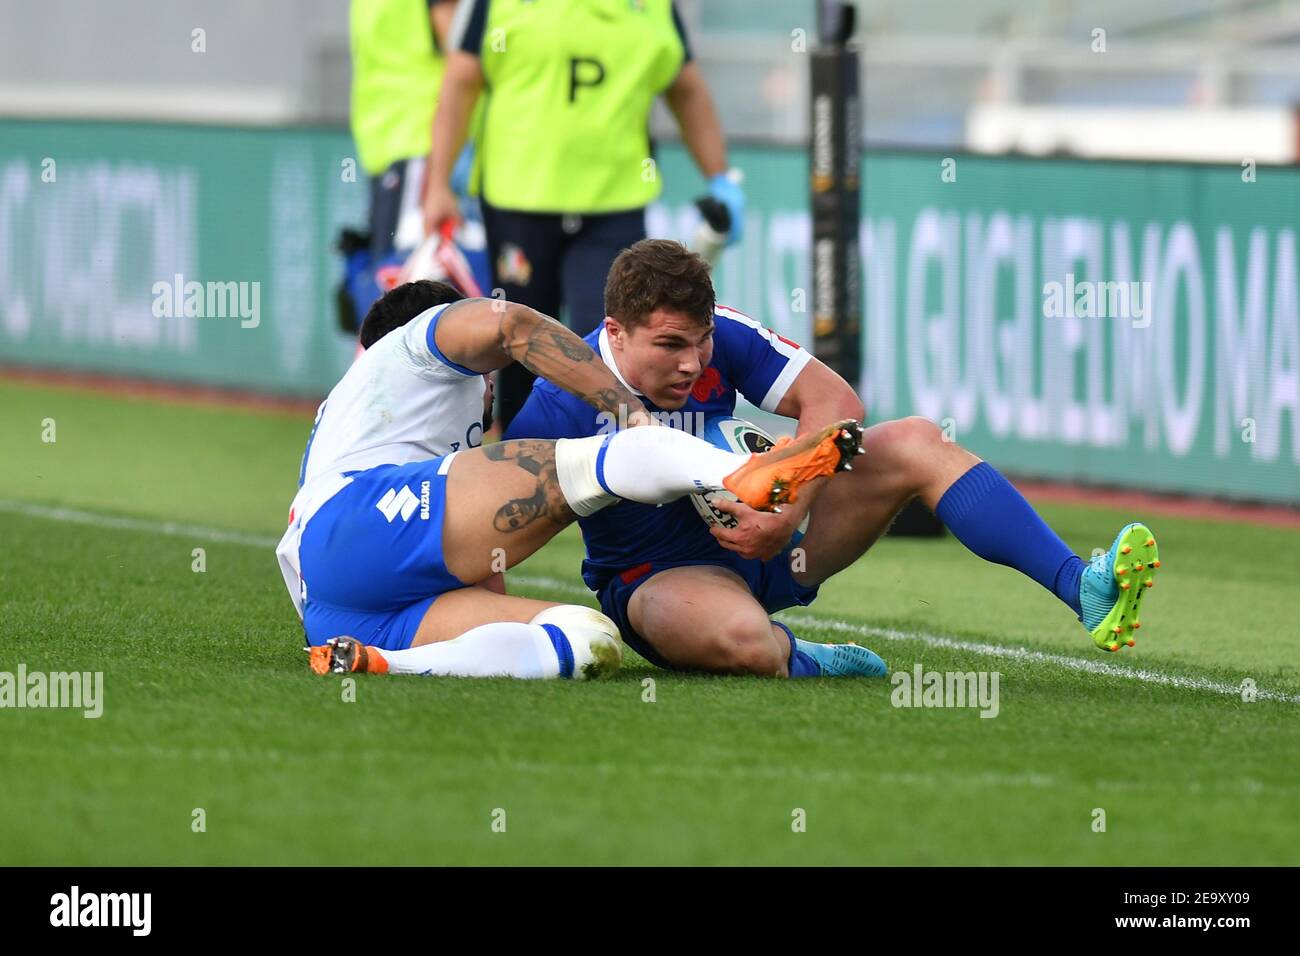 Rome, Italy. 6th Feb, 2021. Rome, Italy, Stadio Olimpico, February 06, 2021, Antoine Dupont (France) during Italy vs France - Rugby Six Nations match Credit: Carlo Cappuccitti/LPS/ZUMA Wire/Alamy Live News Stock Photo